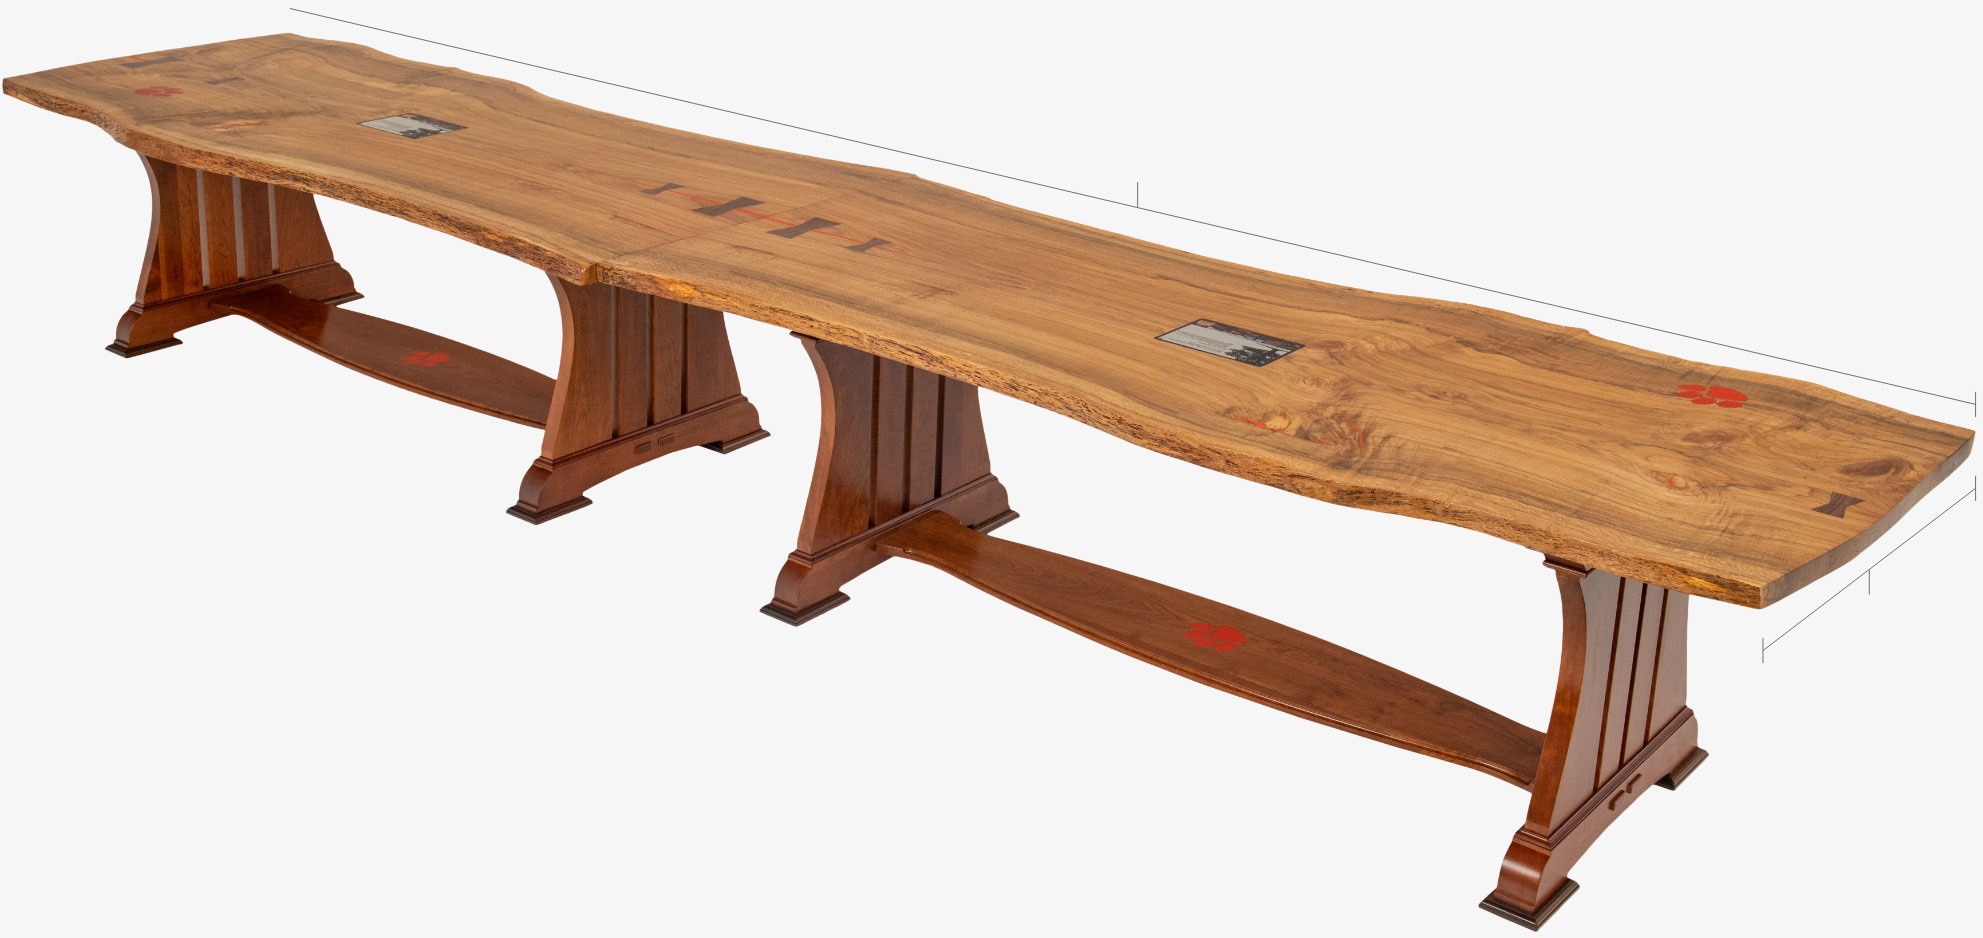 Full table with dimensons (17ft-4in X 4ft)